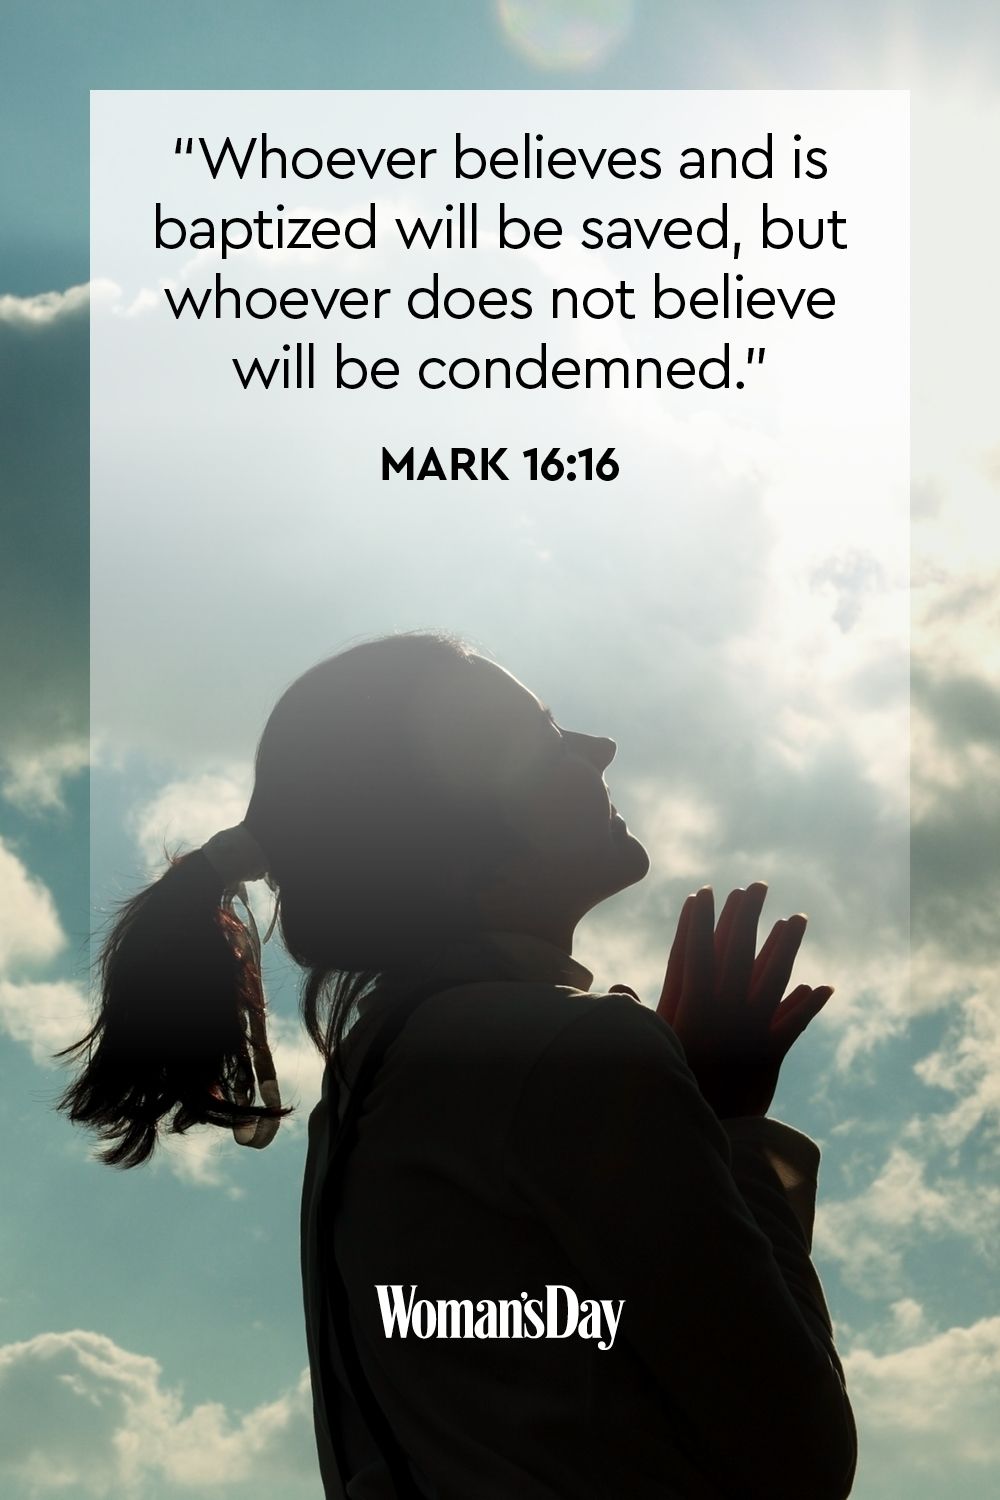 whoever believes and is baptized will be saved but whoever does not believe will be condemned.